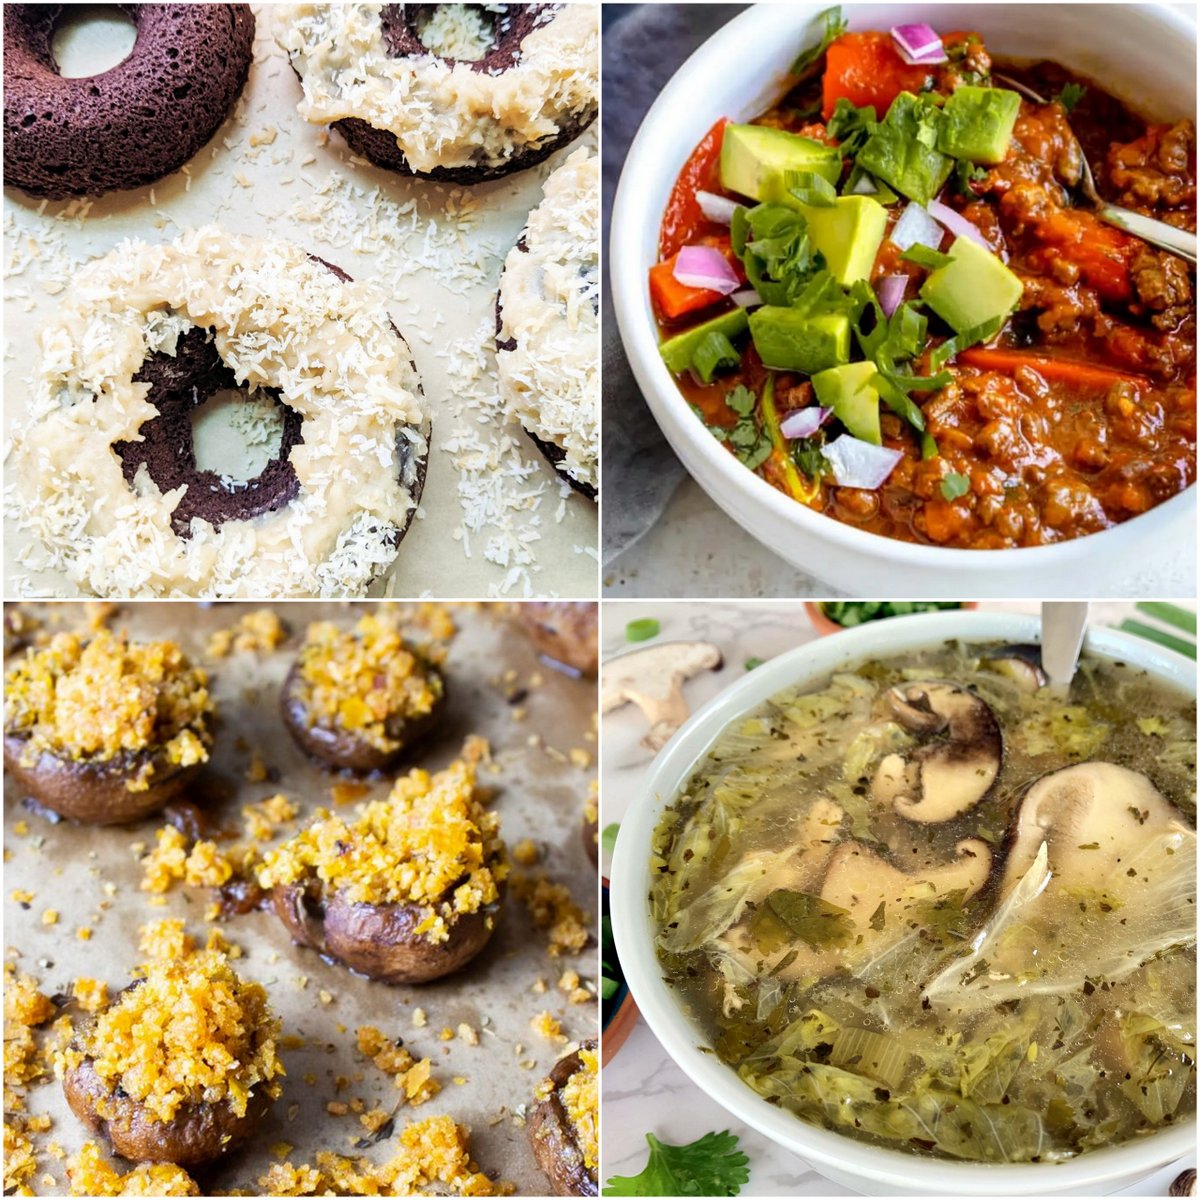 Paleo AIP Recipe Roundtable #395 | Phoenix Helix - *Featured Recipes: German "Chocolate" Cake Donuts, AIP Chili, Hot and Sour Soup, and The Best Italian Stuffed Mushrooms.